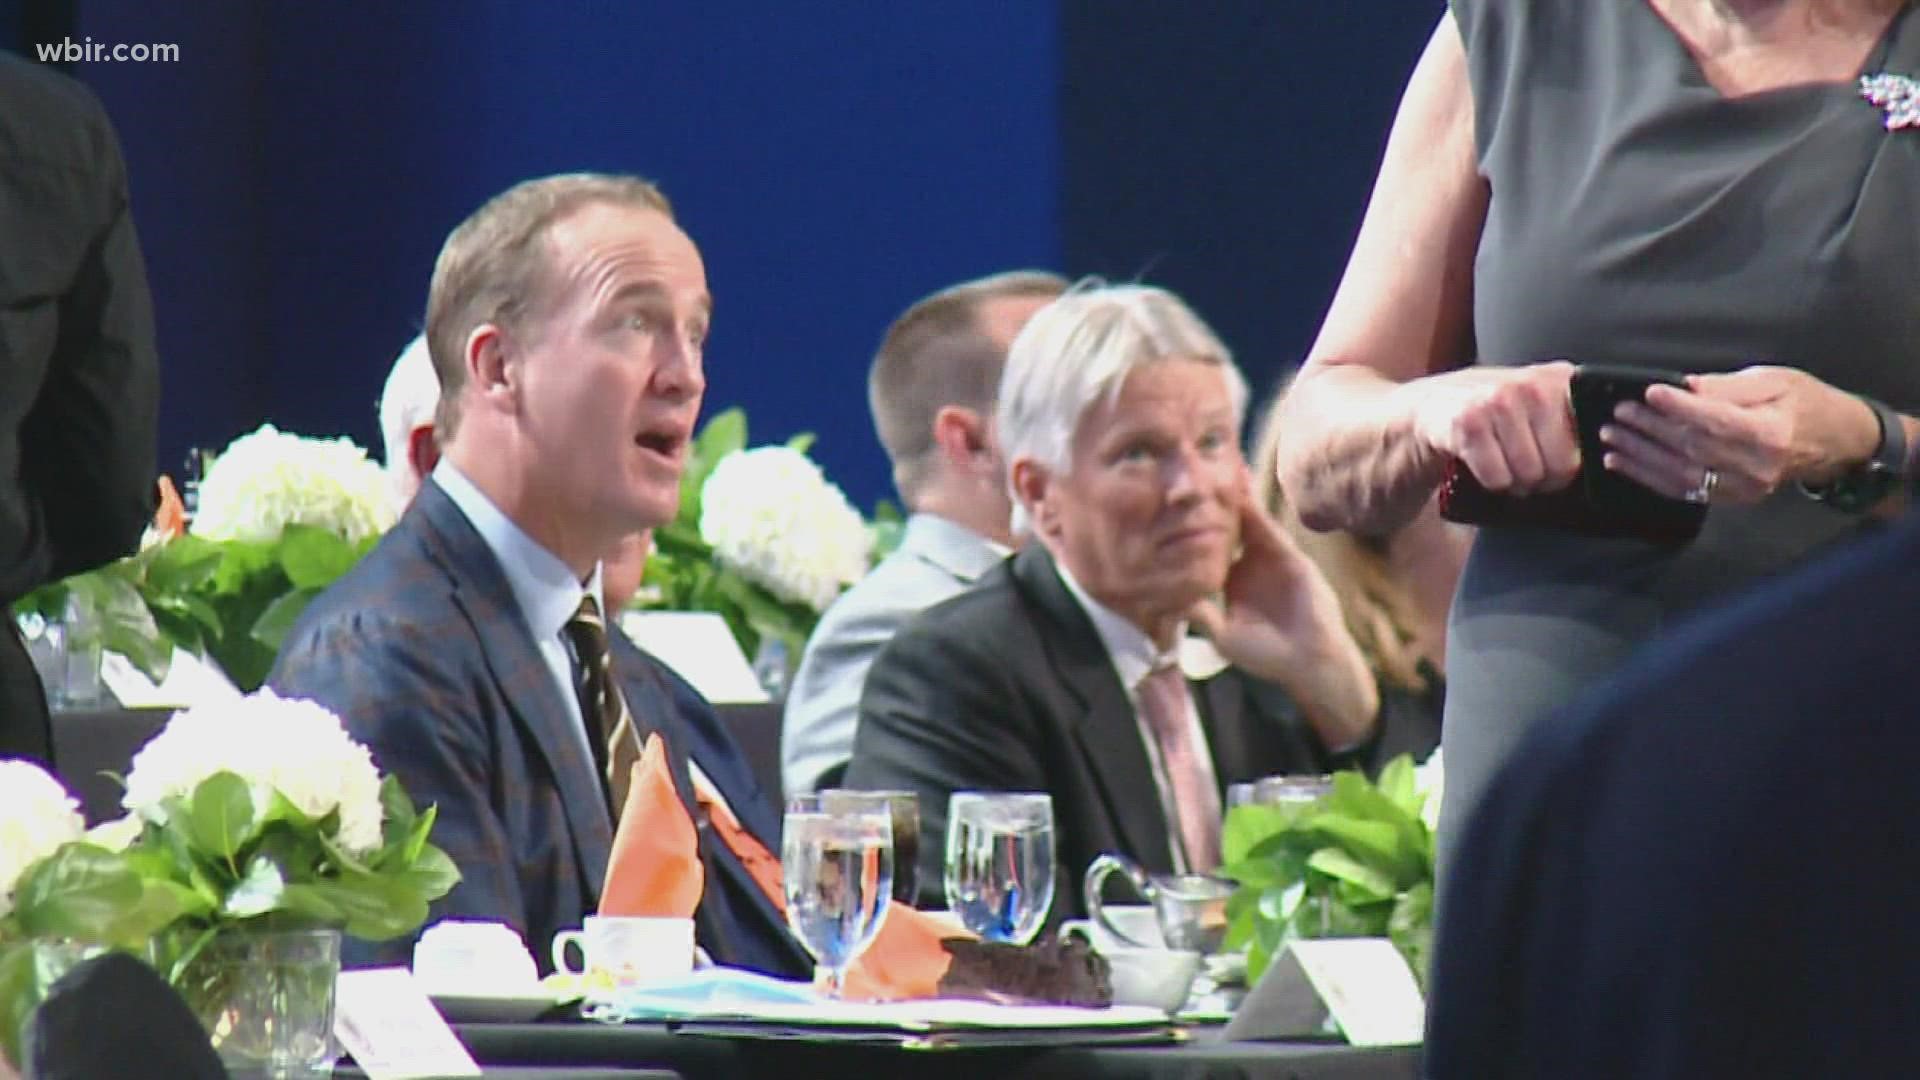 Peyton was a guest speaker at this year's ceremony.